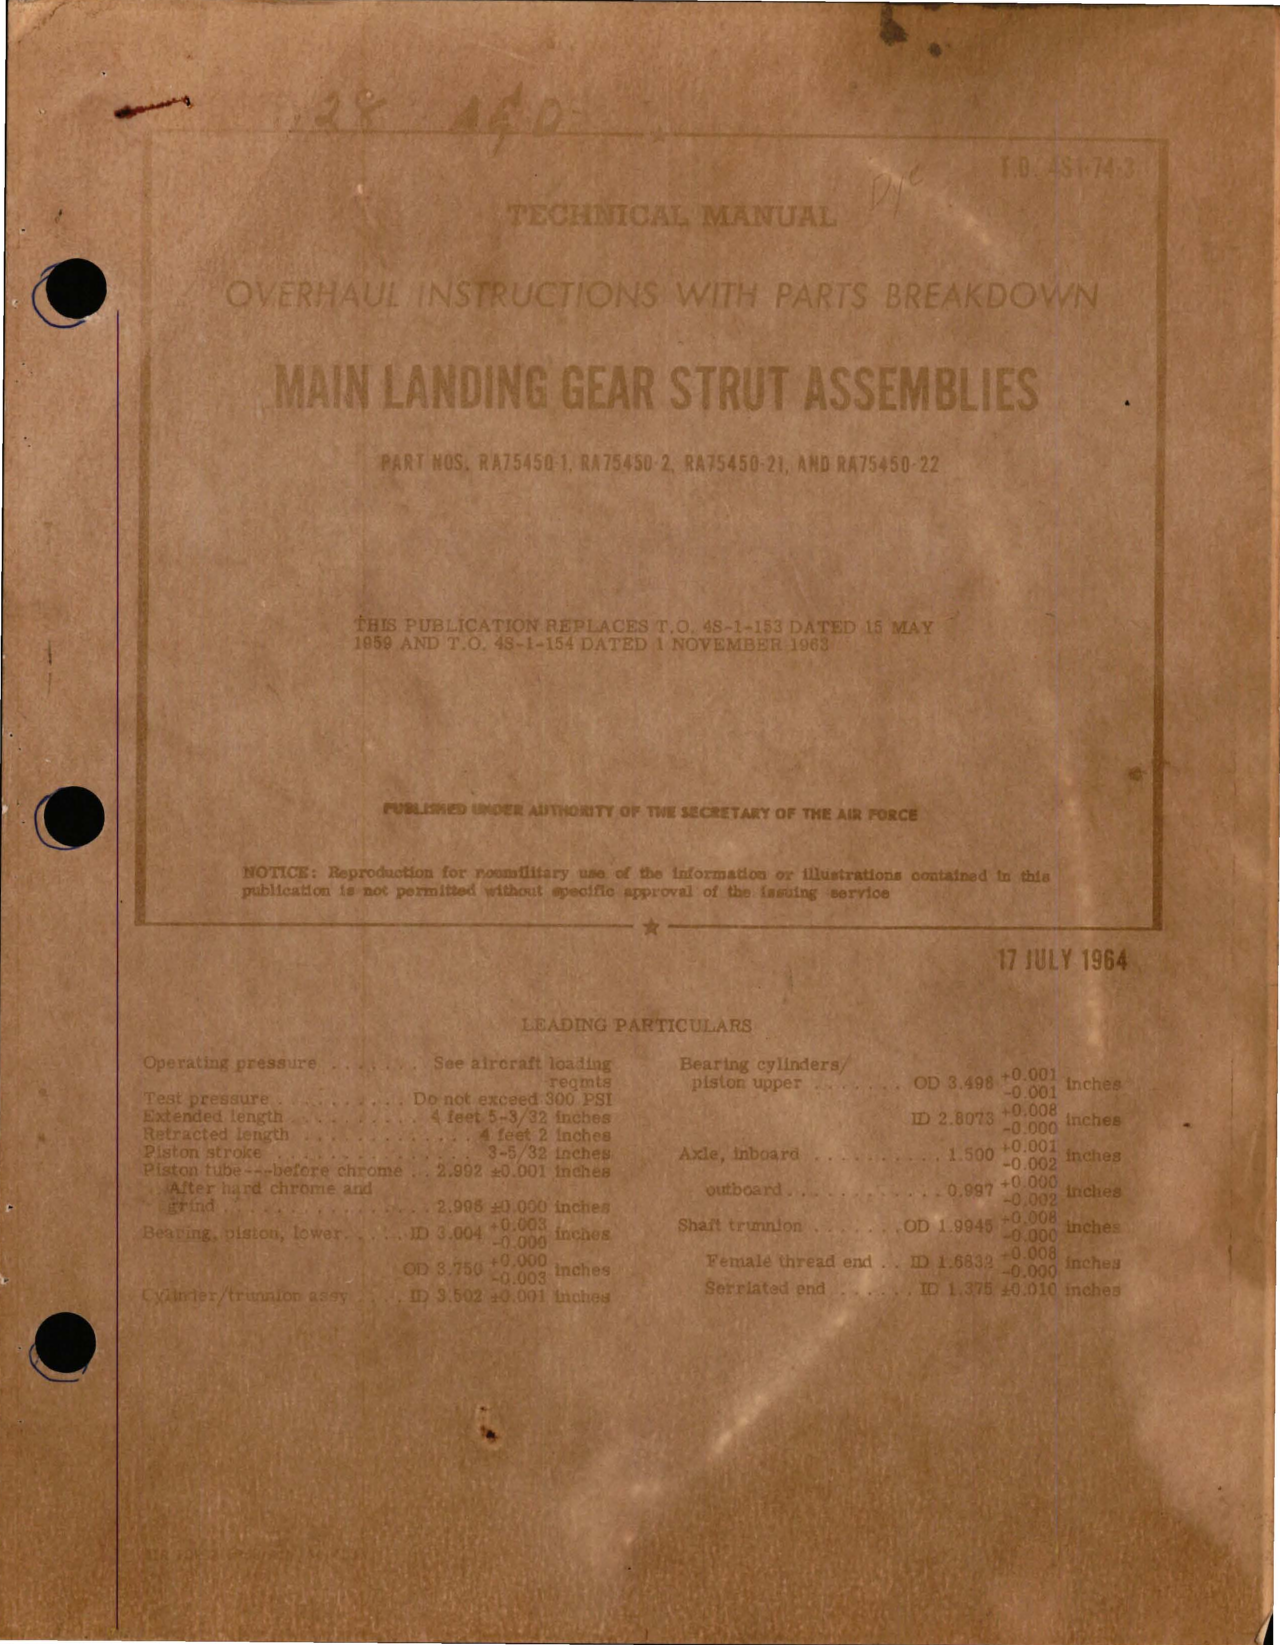 Sample page 1 from AirCorps Library document: Overhaul Instructions with Parts Breakdown for Main Landing Gear Strut Assemblies